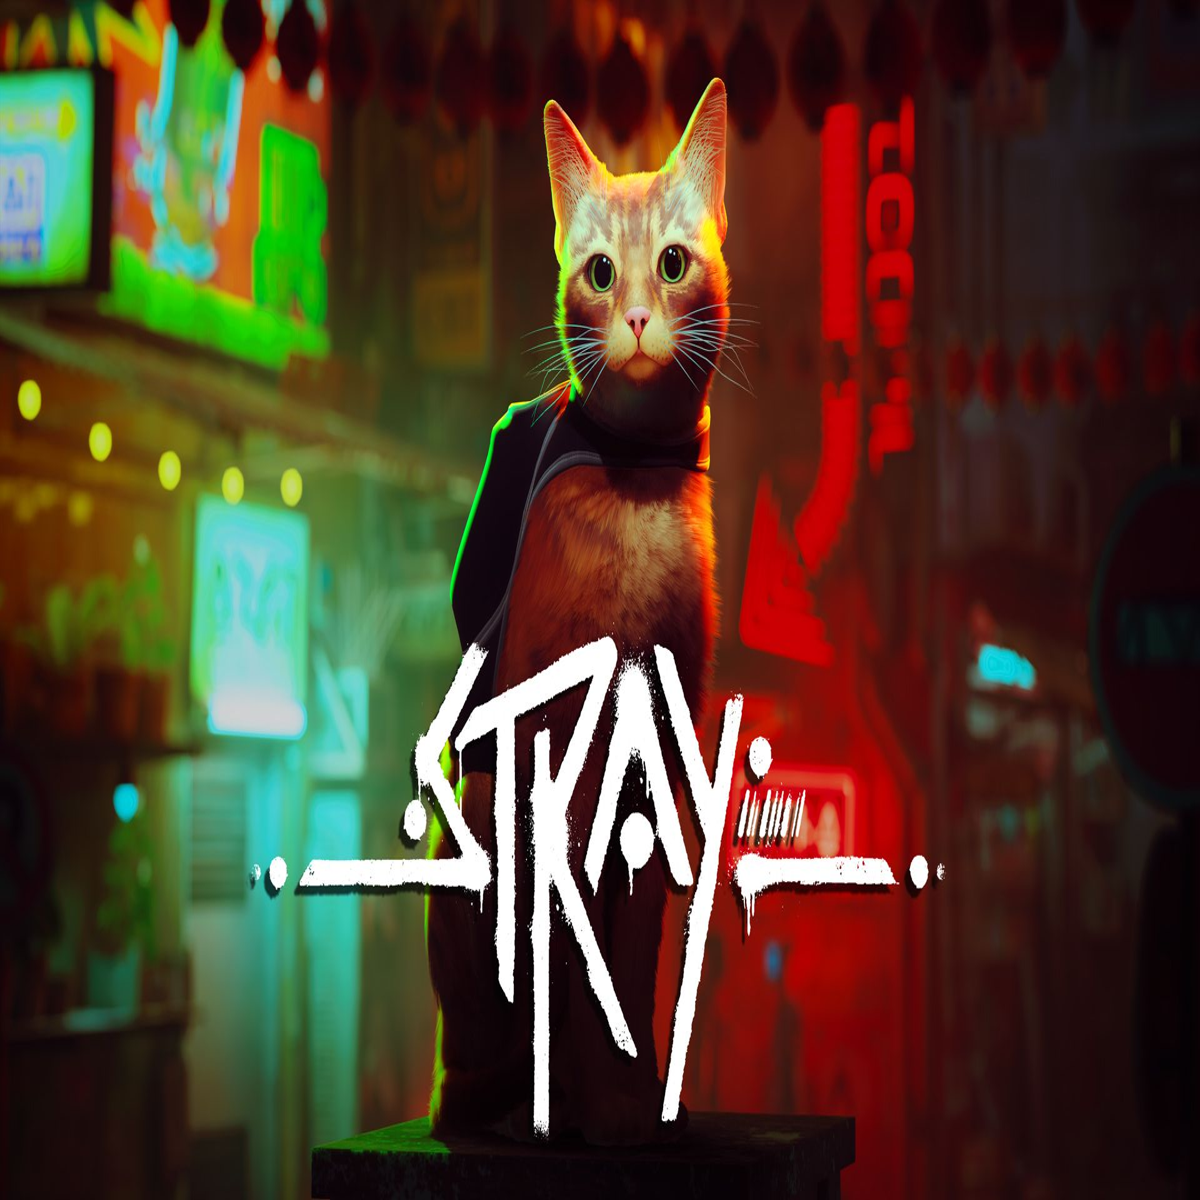 The Detective Cat Game STRAY Just Got Its First Gameplay Trailer